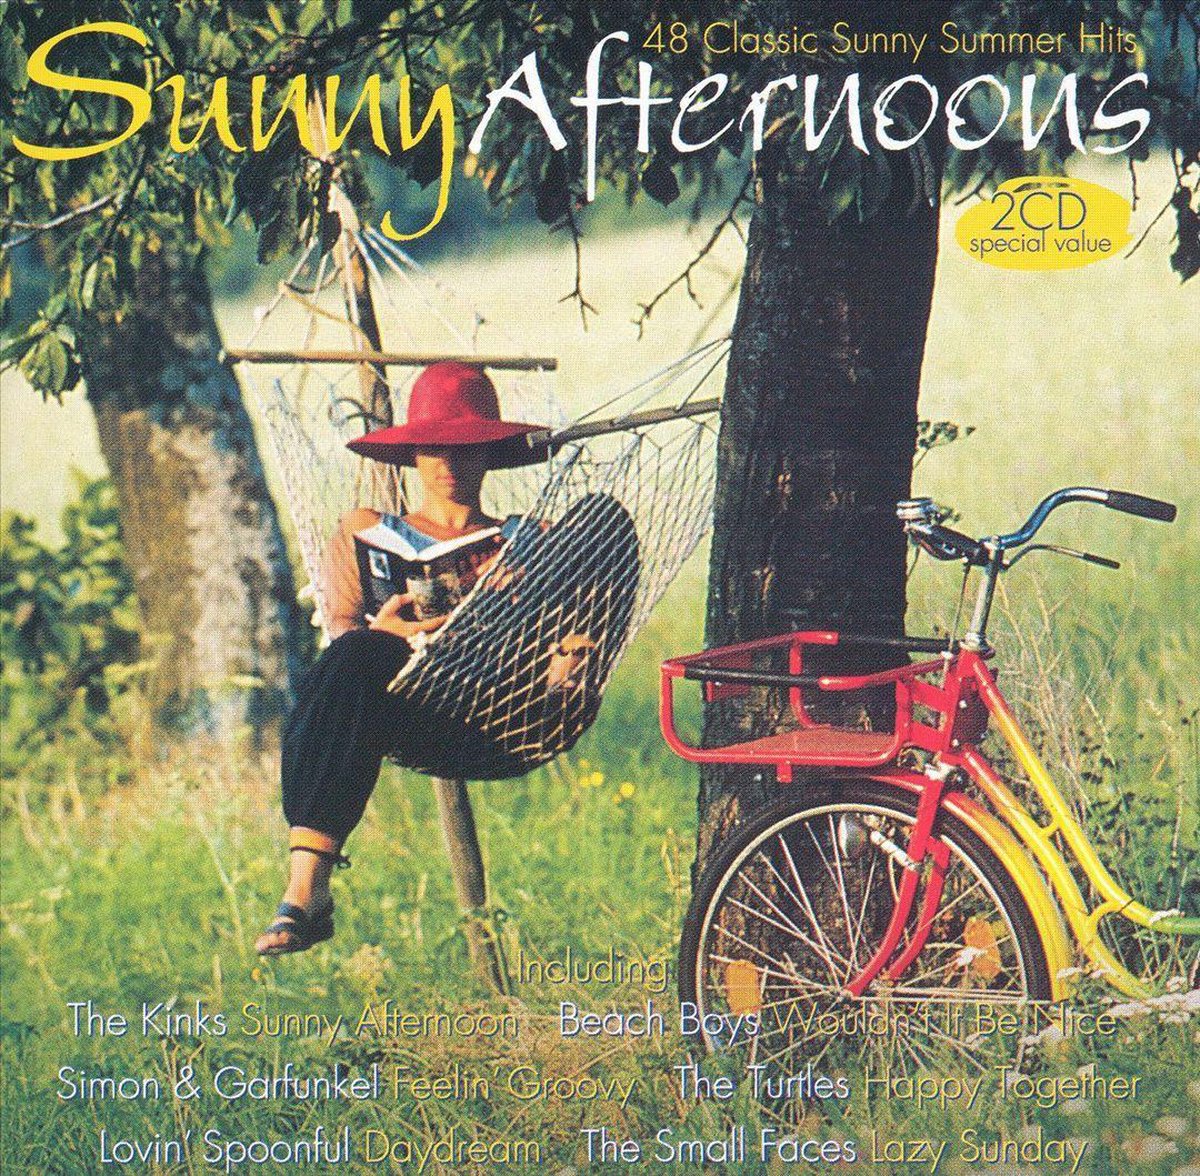 Sunny Afternoons [Polygram] - various artists